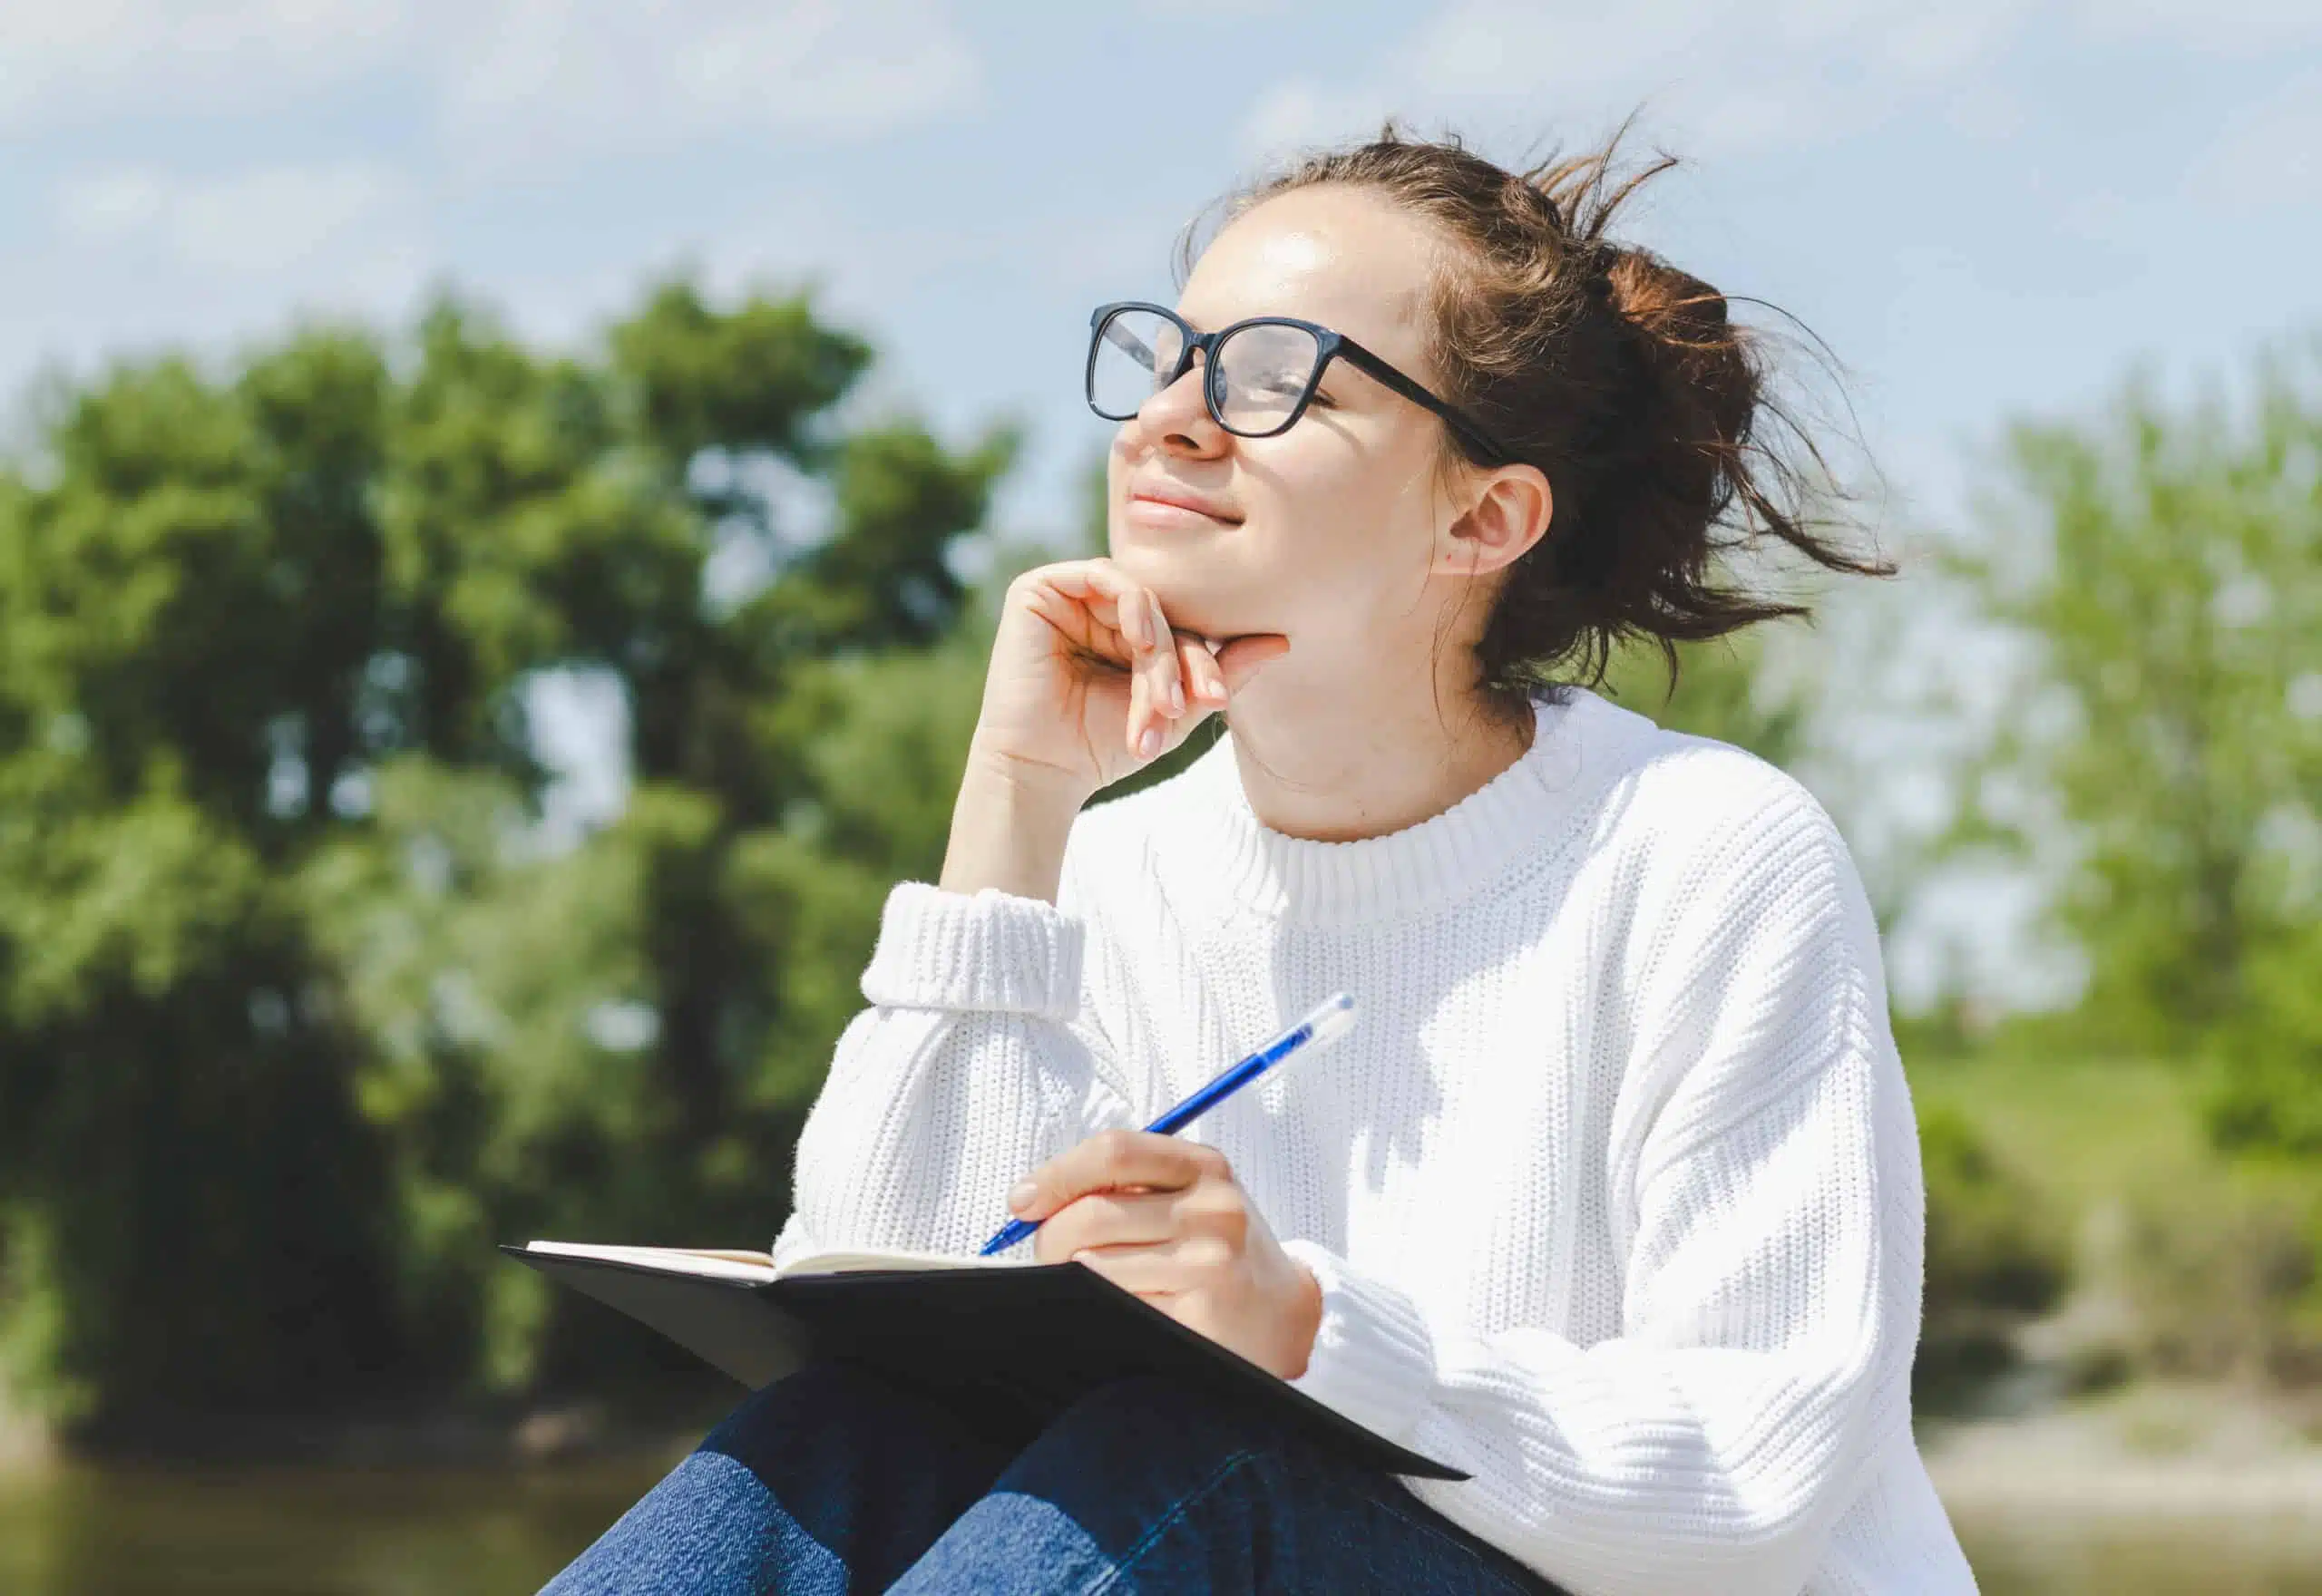 Young woman in glasses writes thoughts in notebook while relaxing outdoor.